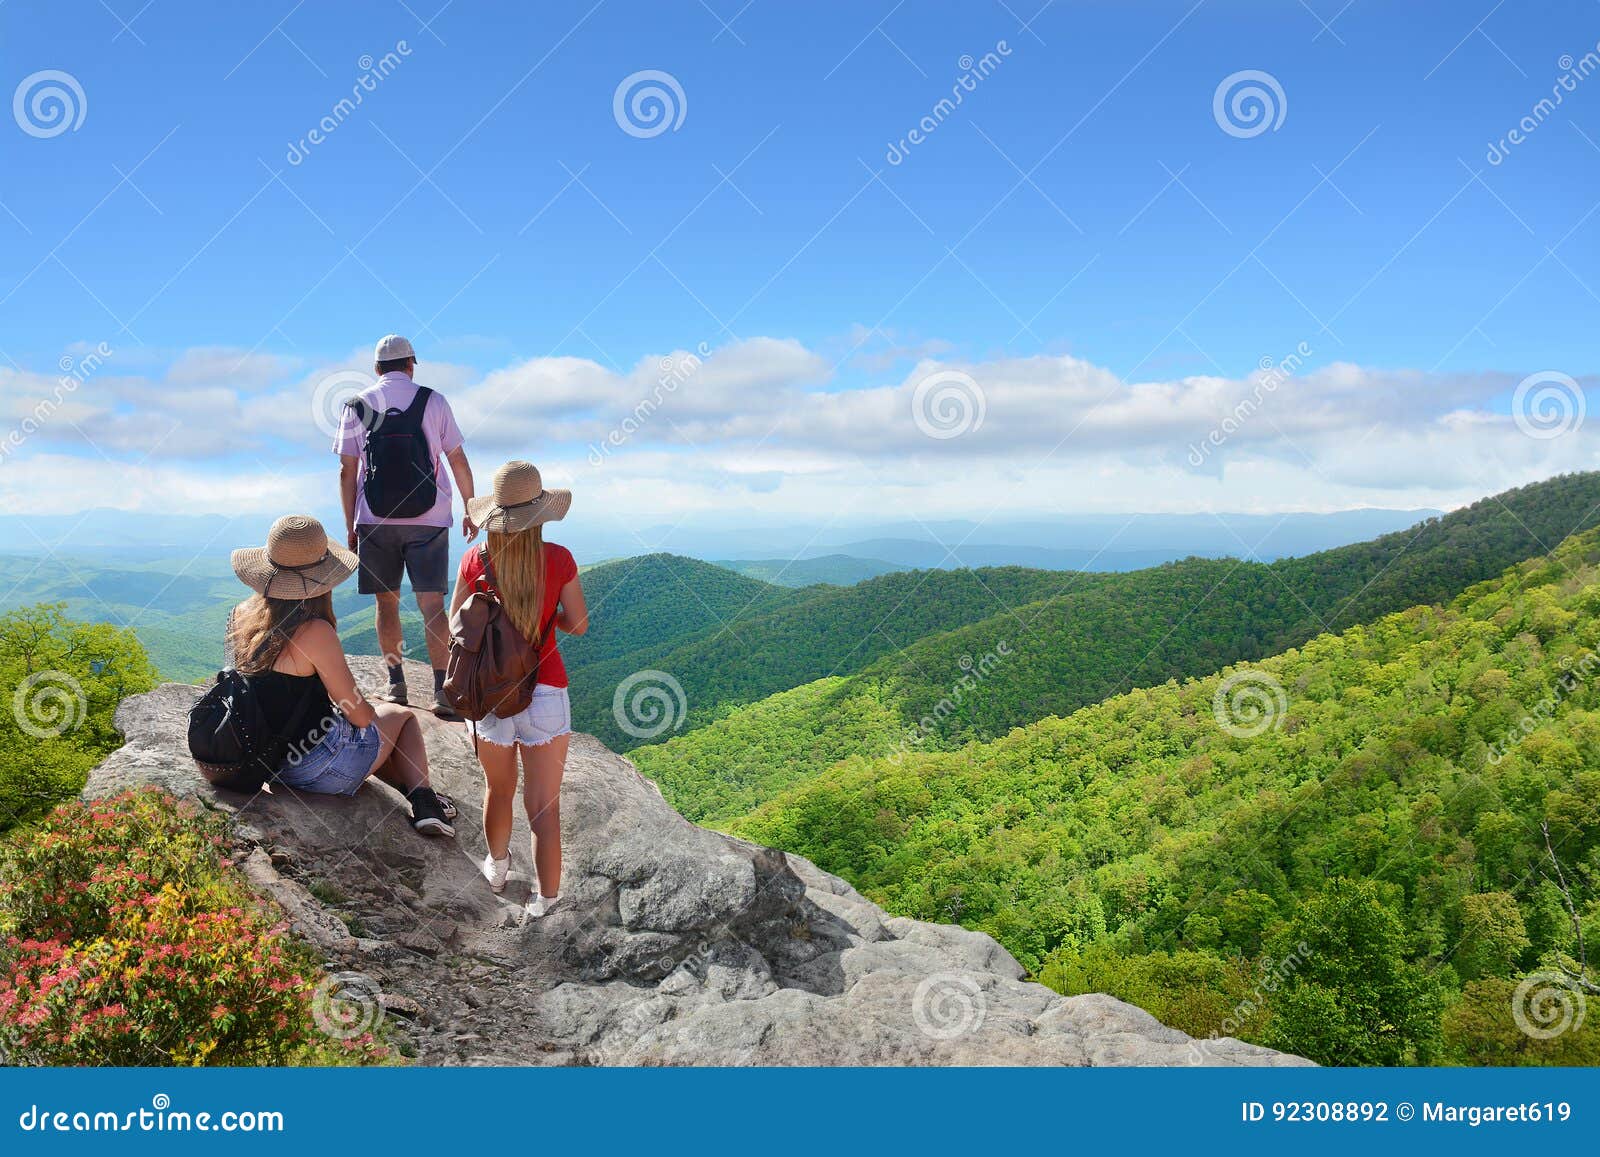 489,855 Hiking Summer Mountains Stock Photos - Free & Royalty-Free Stock  Photos from Dreamstime